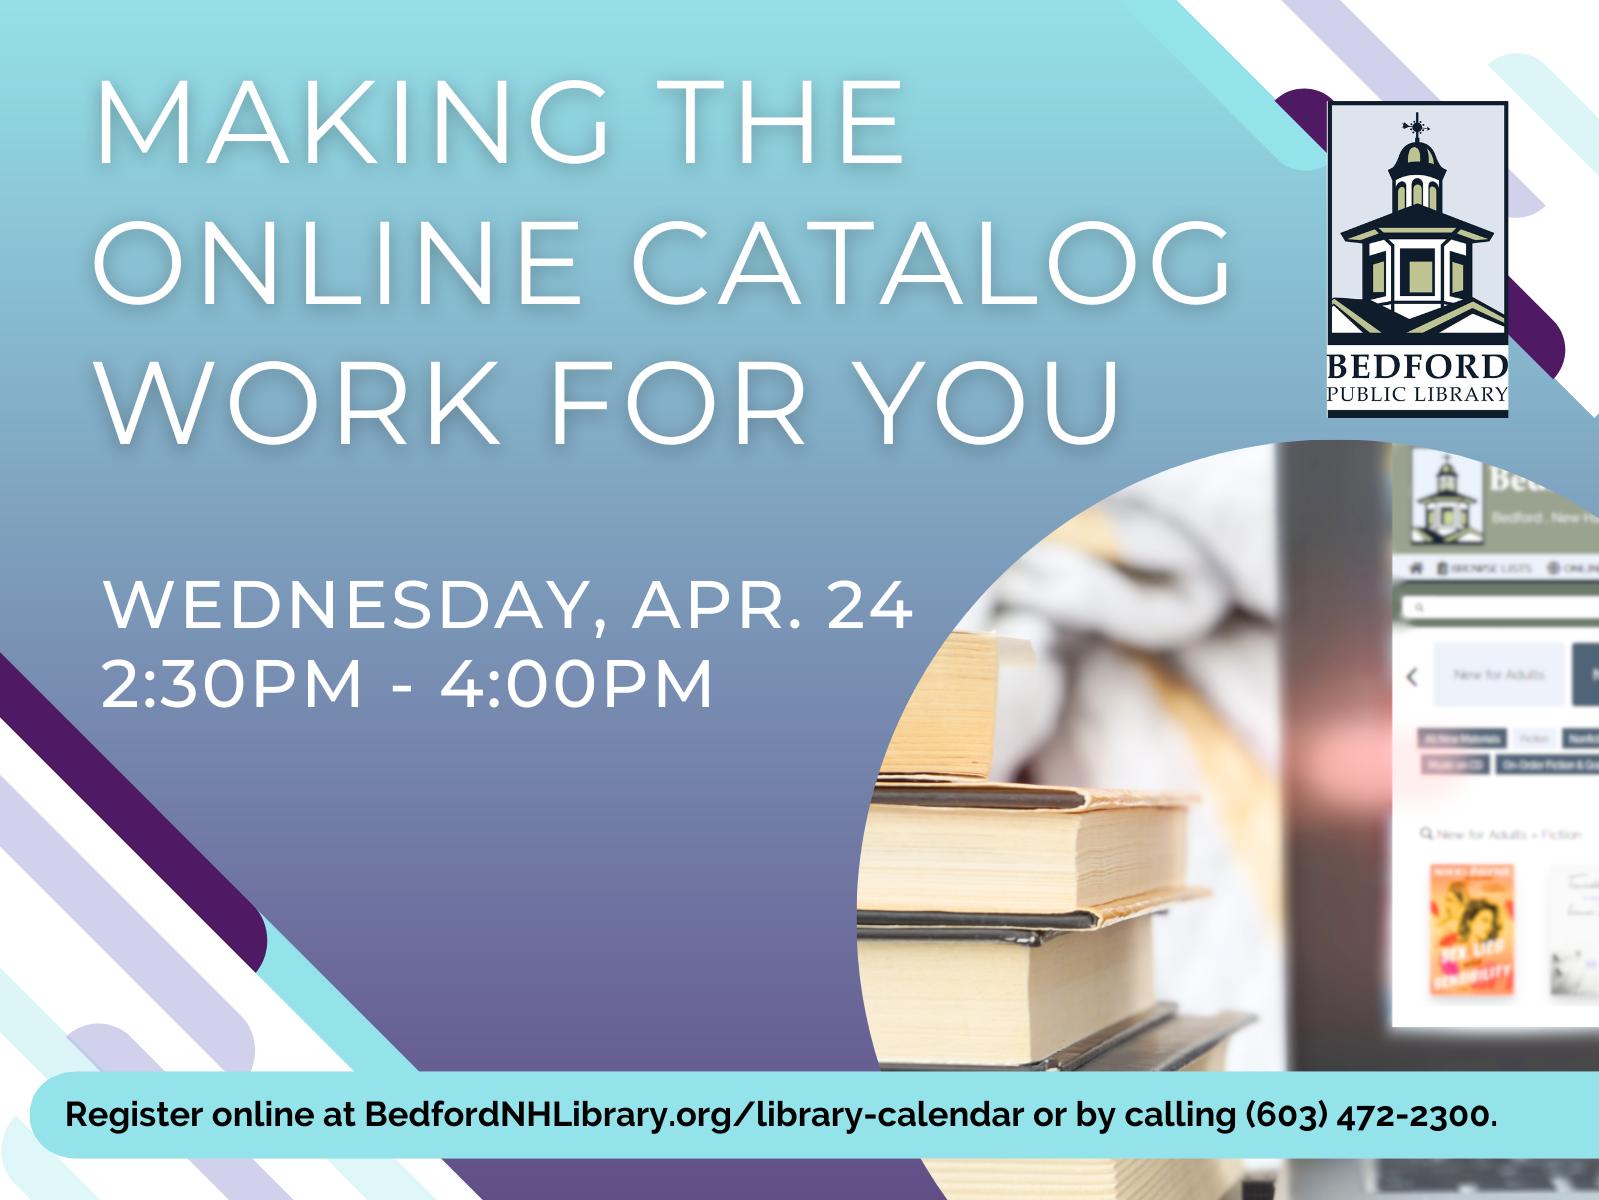 Making the Online Catalog Work for You